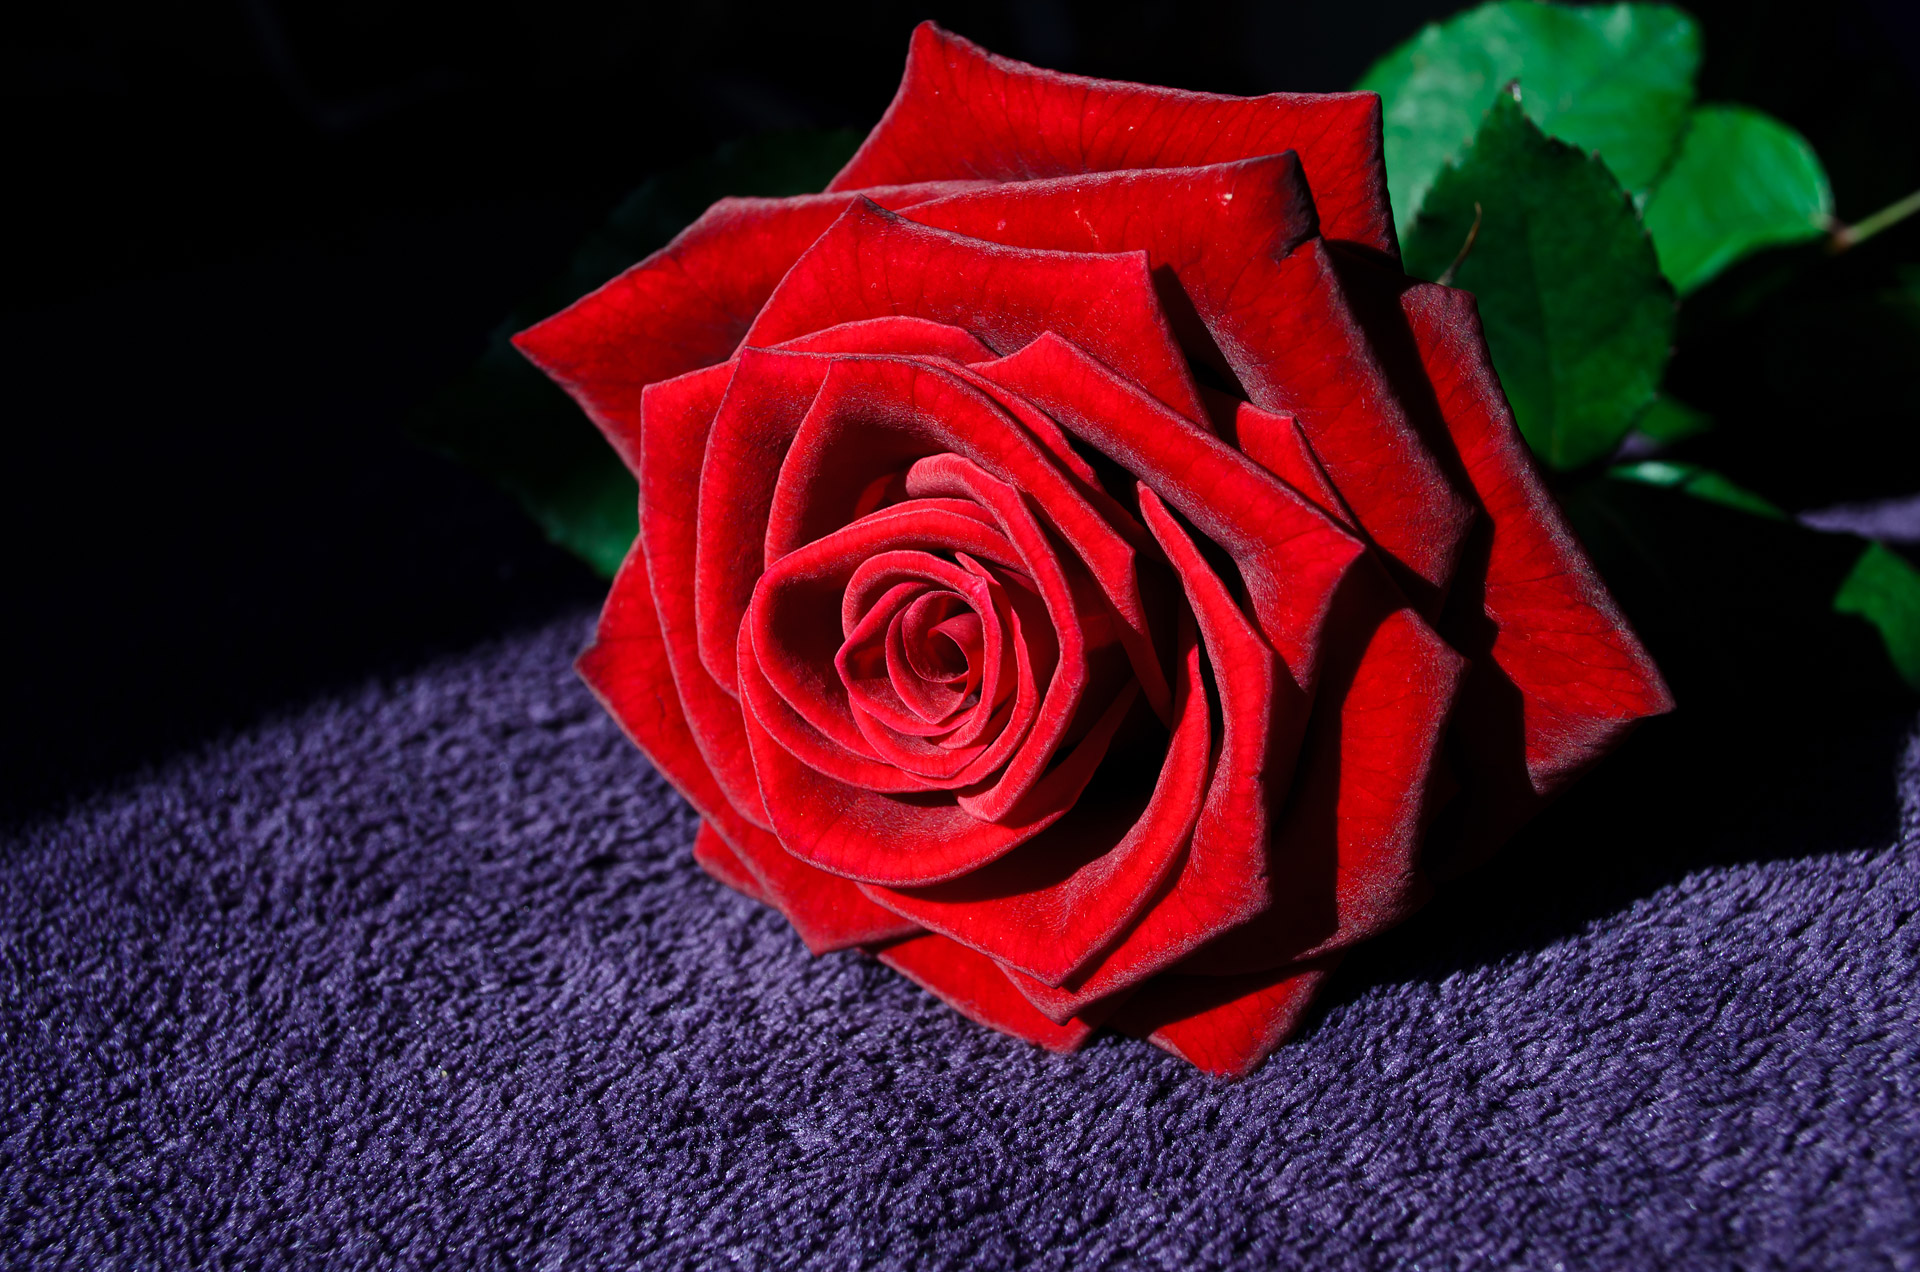 Red Rose Wallpaper High Quality